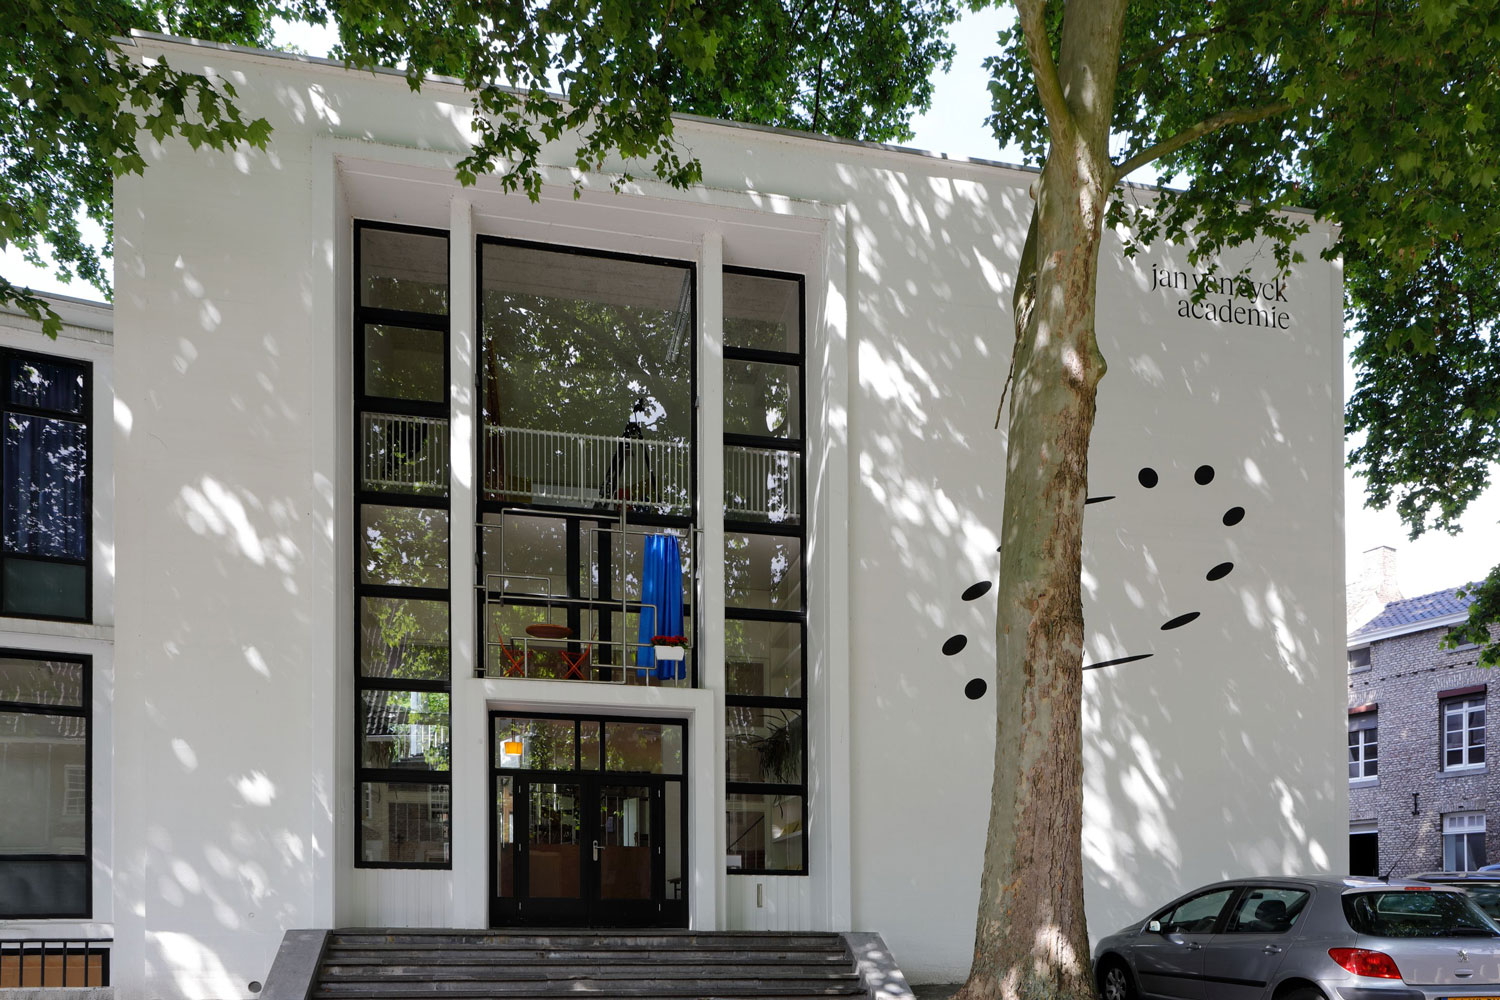 Jan van Eyck Academie's main entrance with site-specific installation by Yona Lee in Maastricht, Netherlands